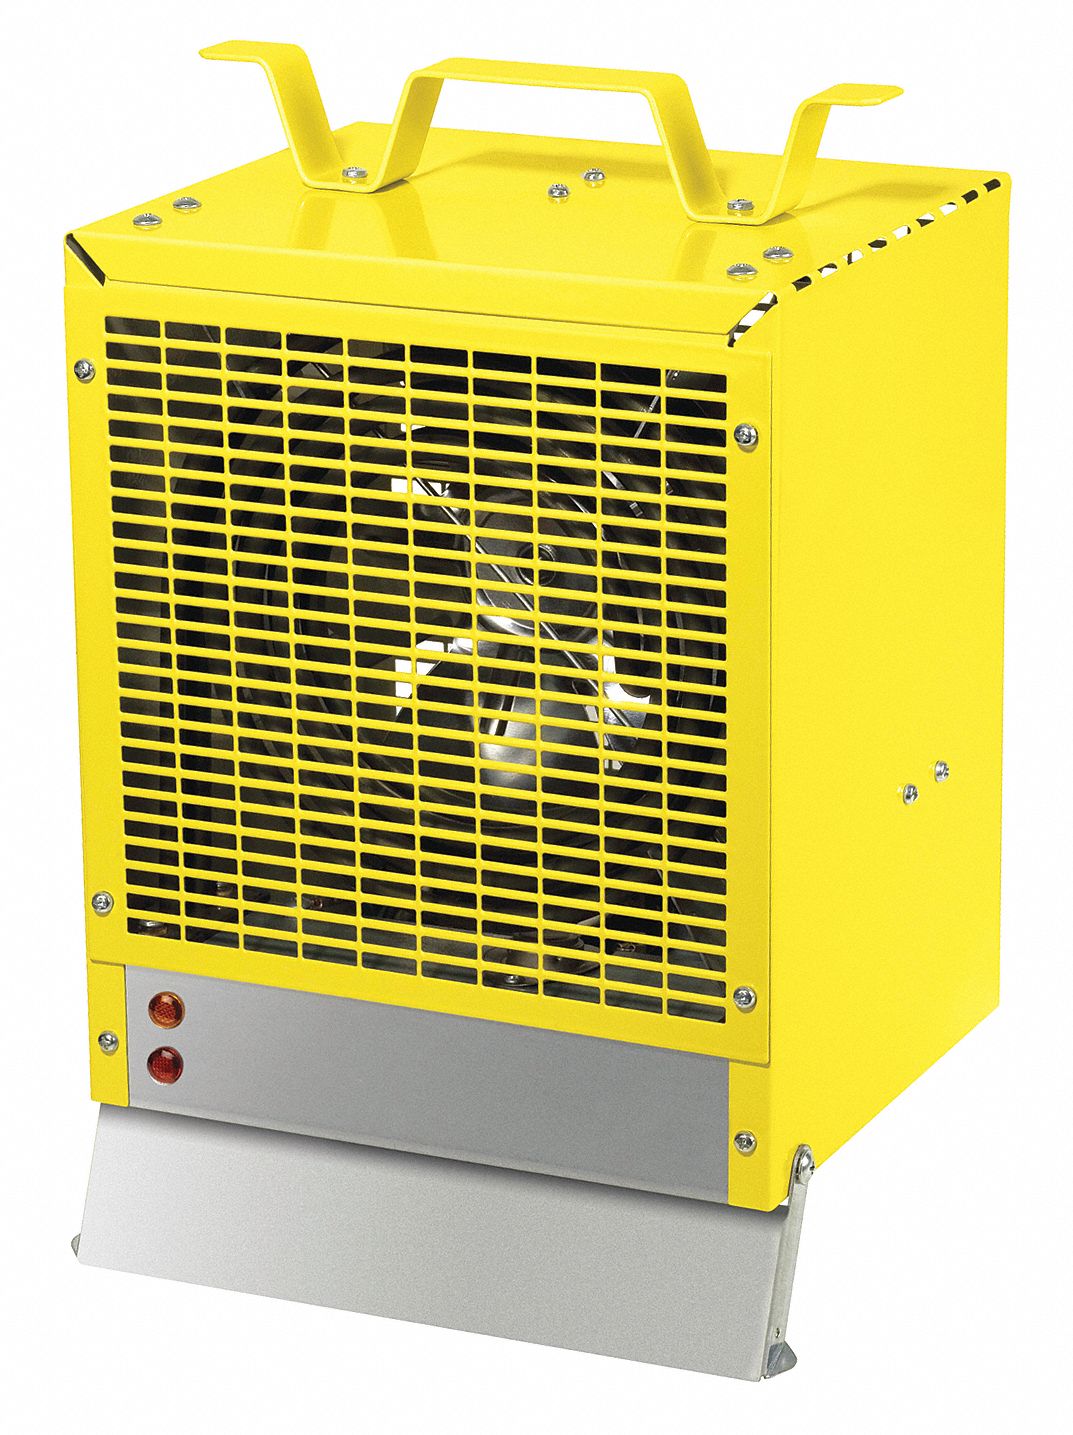 DIMPLEX 9 1/8" x 7 1/4" x 11" Fan Forced Non Oscillating Electric Space Heater, Yellow   Portable Electric Heaters   14C622|EMC4240